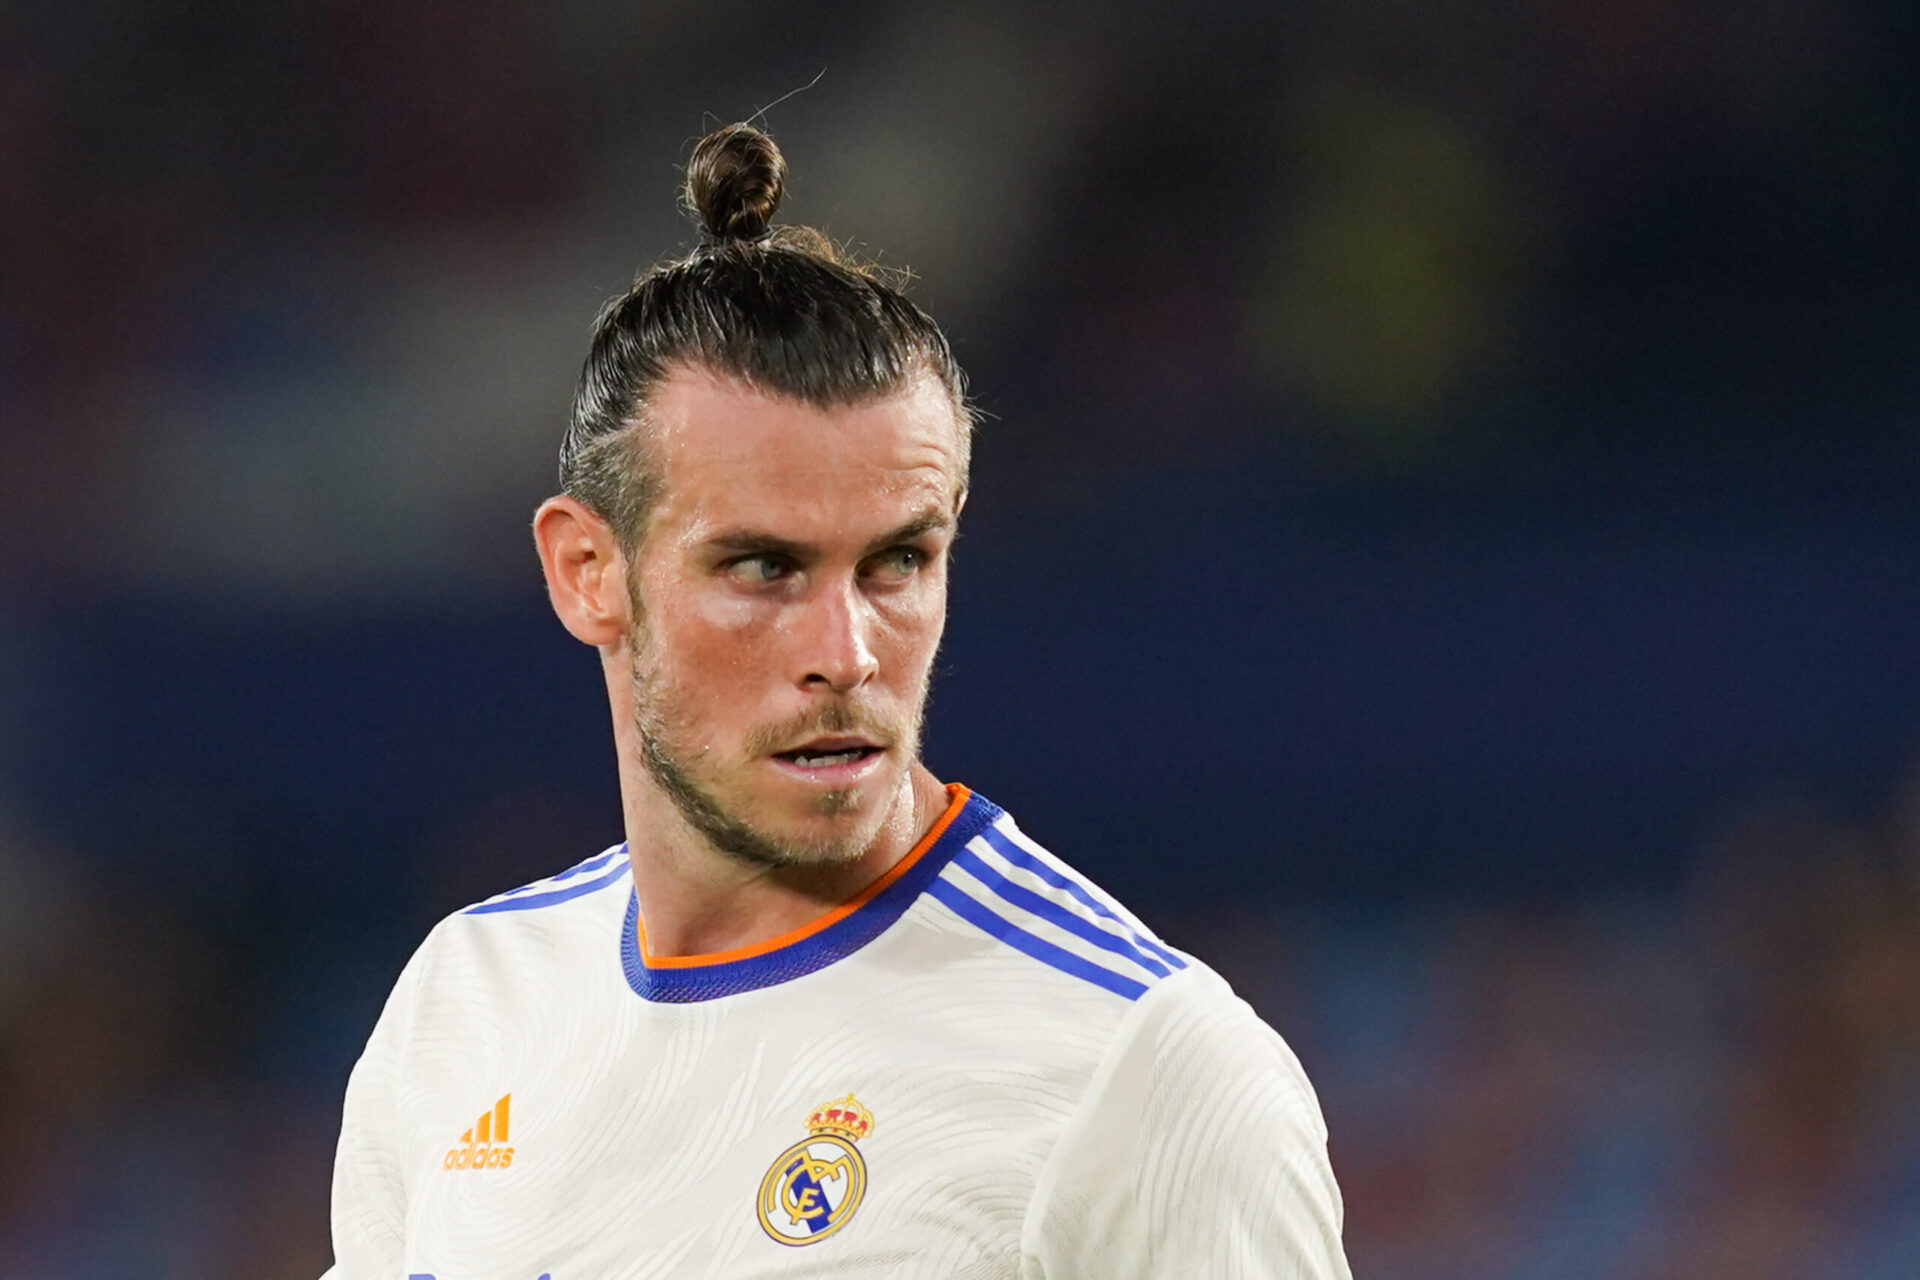 Gareth Bale sous le maillot du Real Madrid (IconSport)